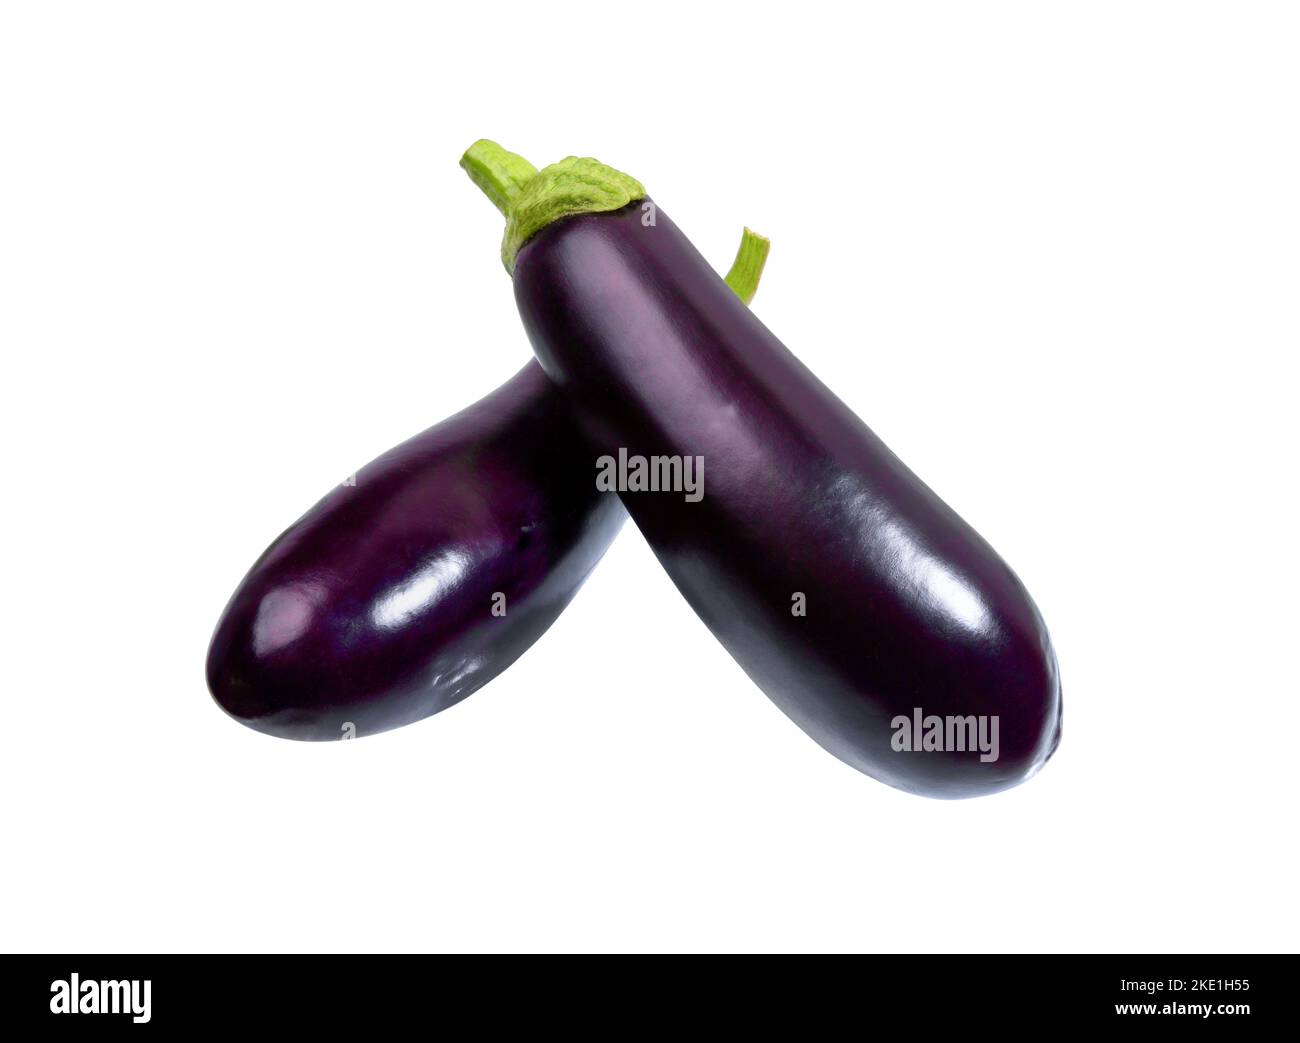 Eggplant or aubergine vegetable isolated on white background.  Eggplant cut out. Stock Photo